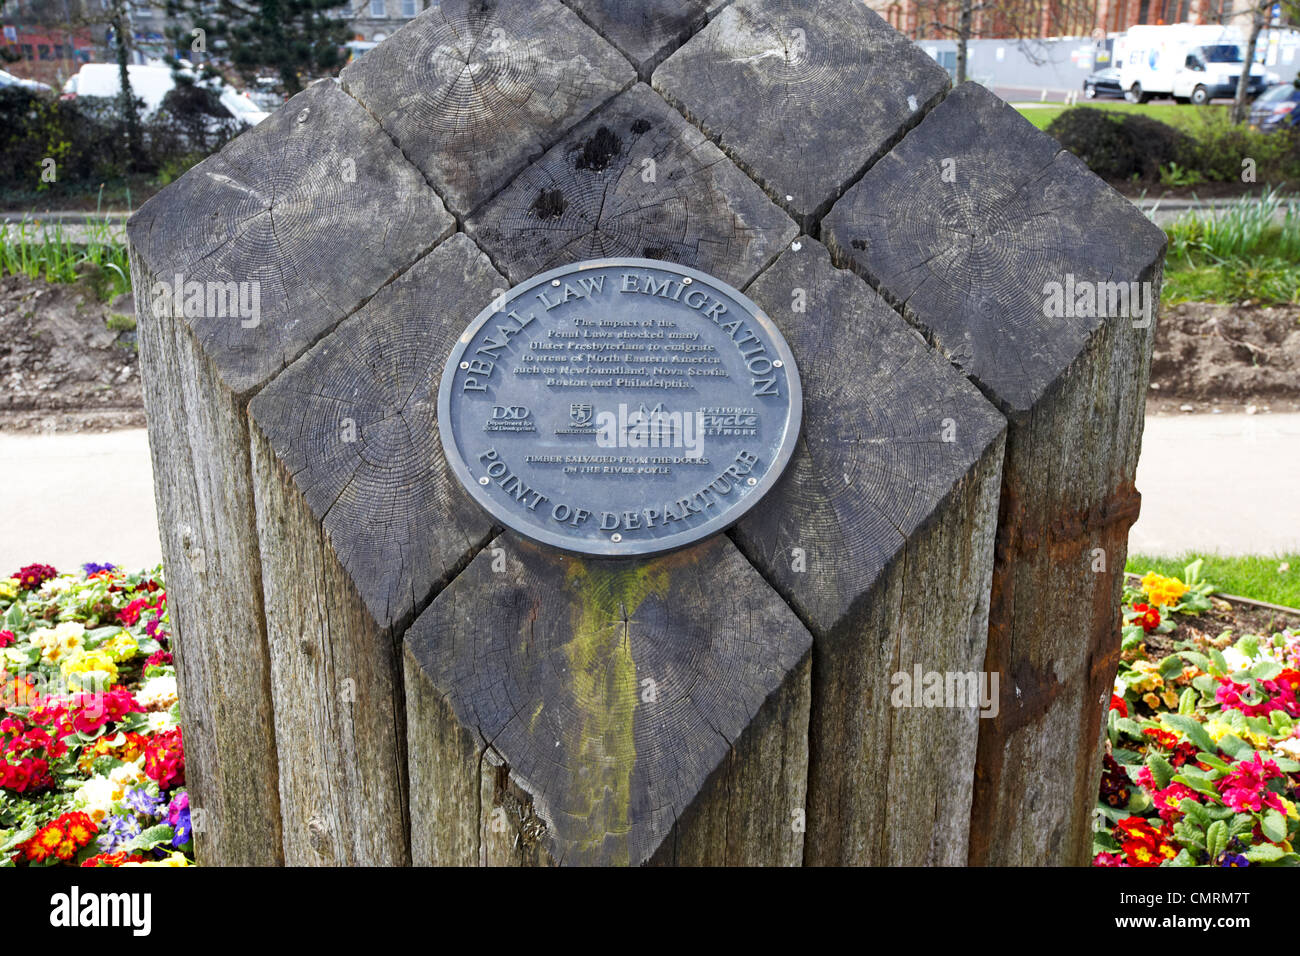 penal law emigration point of departure memorial Derry city county londonderry northern ireland uk. Stock Photo